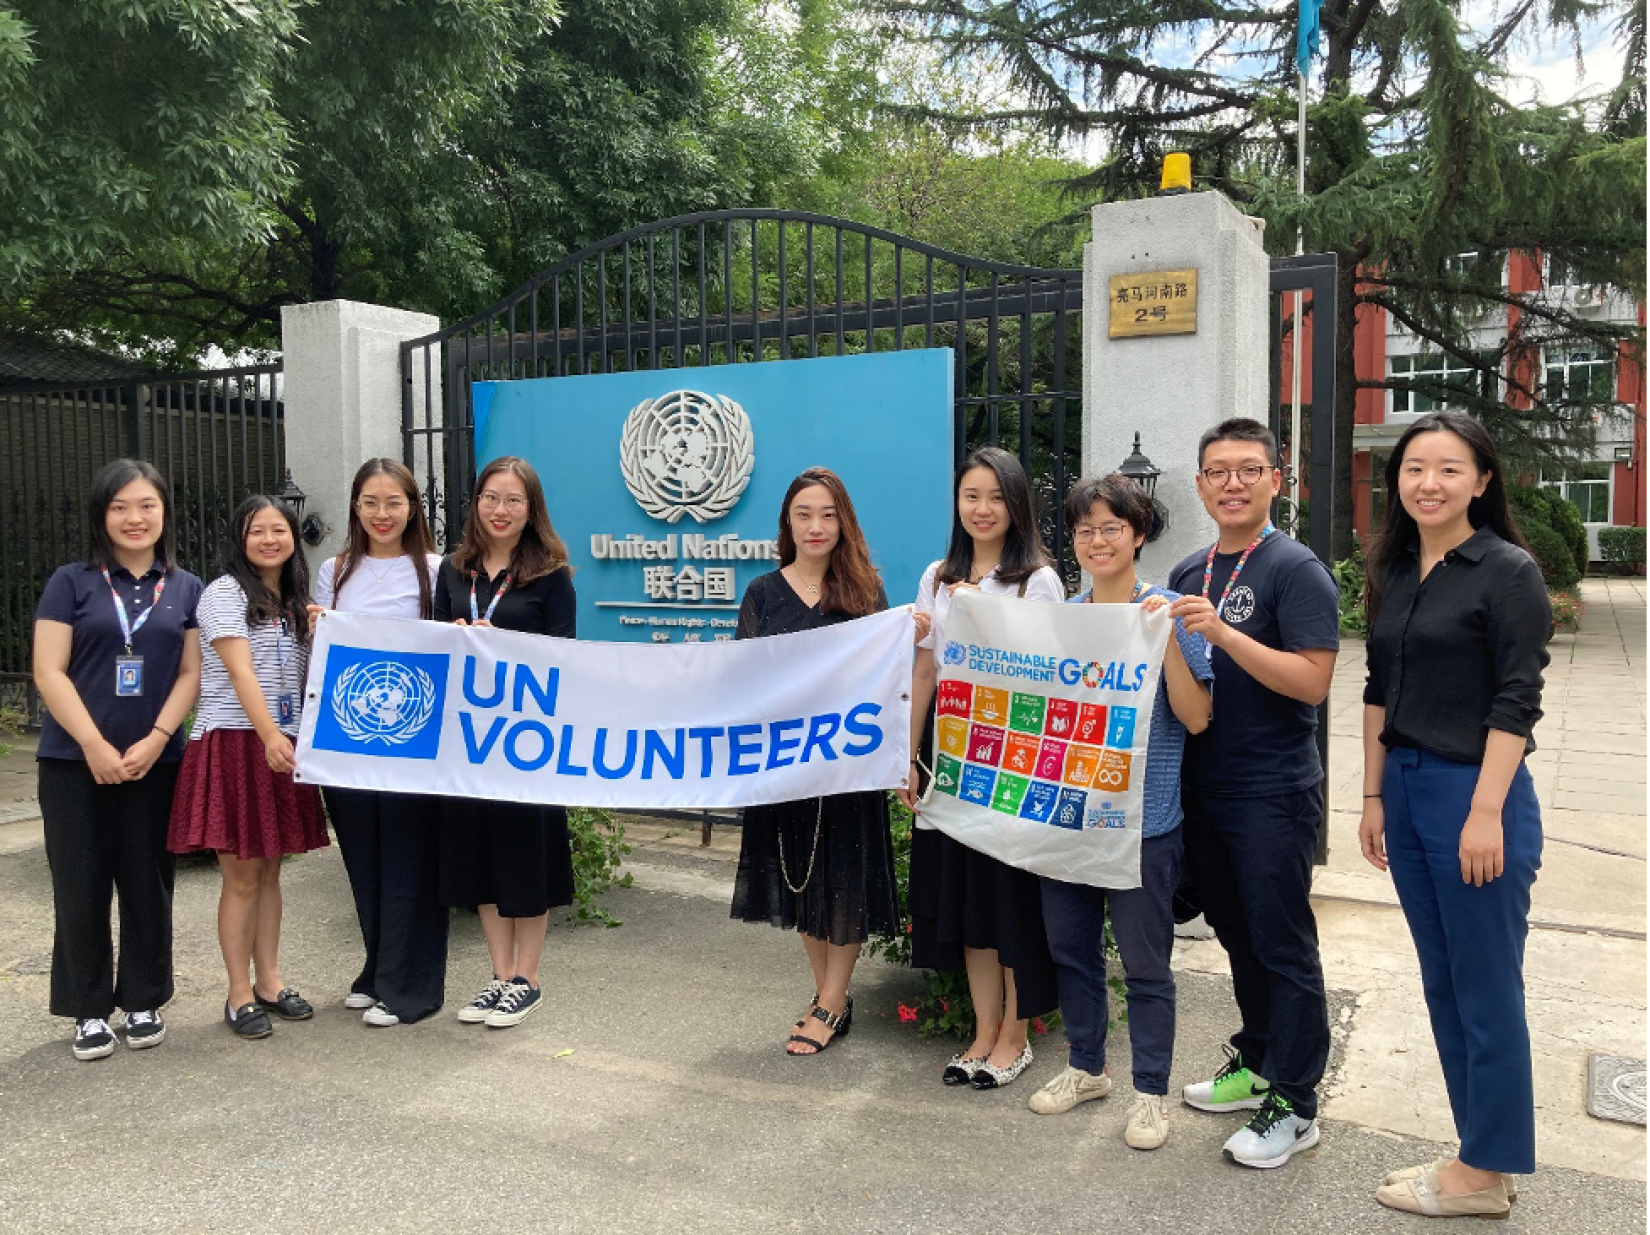 Ms. Zhang and the UNV family in China